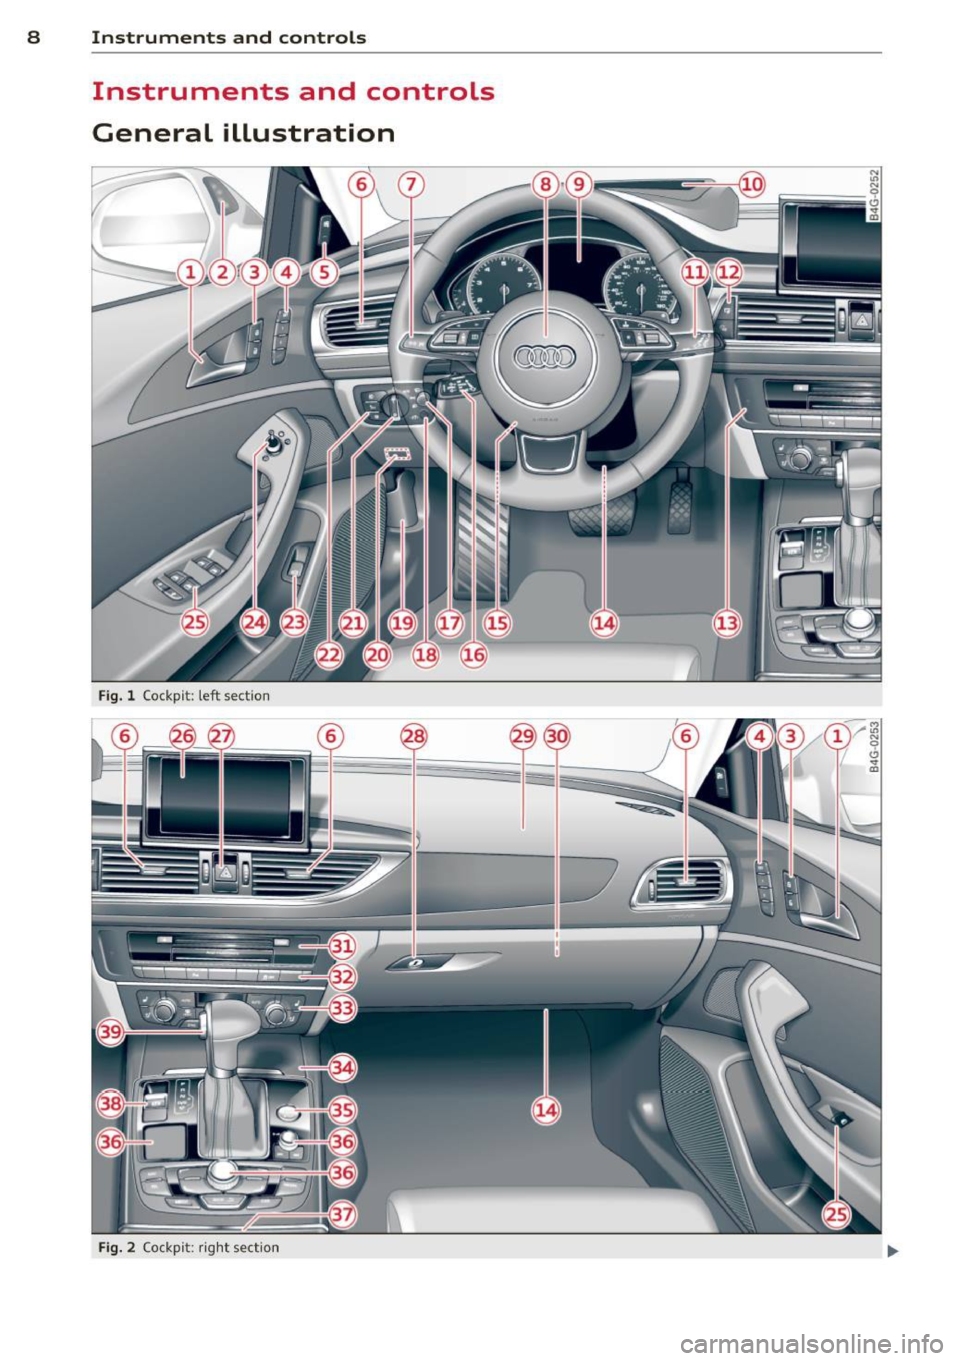 AUDI A6 2015  Owners Manual 8  Instruments and controls 
Instruments  and  controls 
General  illustration 
Fig. l Cockp it:  left  sect io n 
Fig. 2 Co ck pi t: ri ght  sect io n  